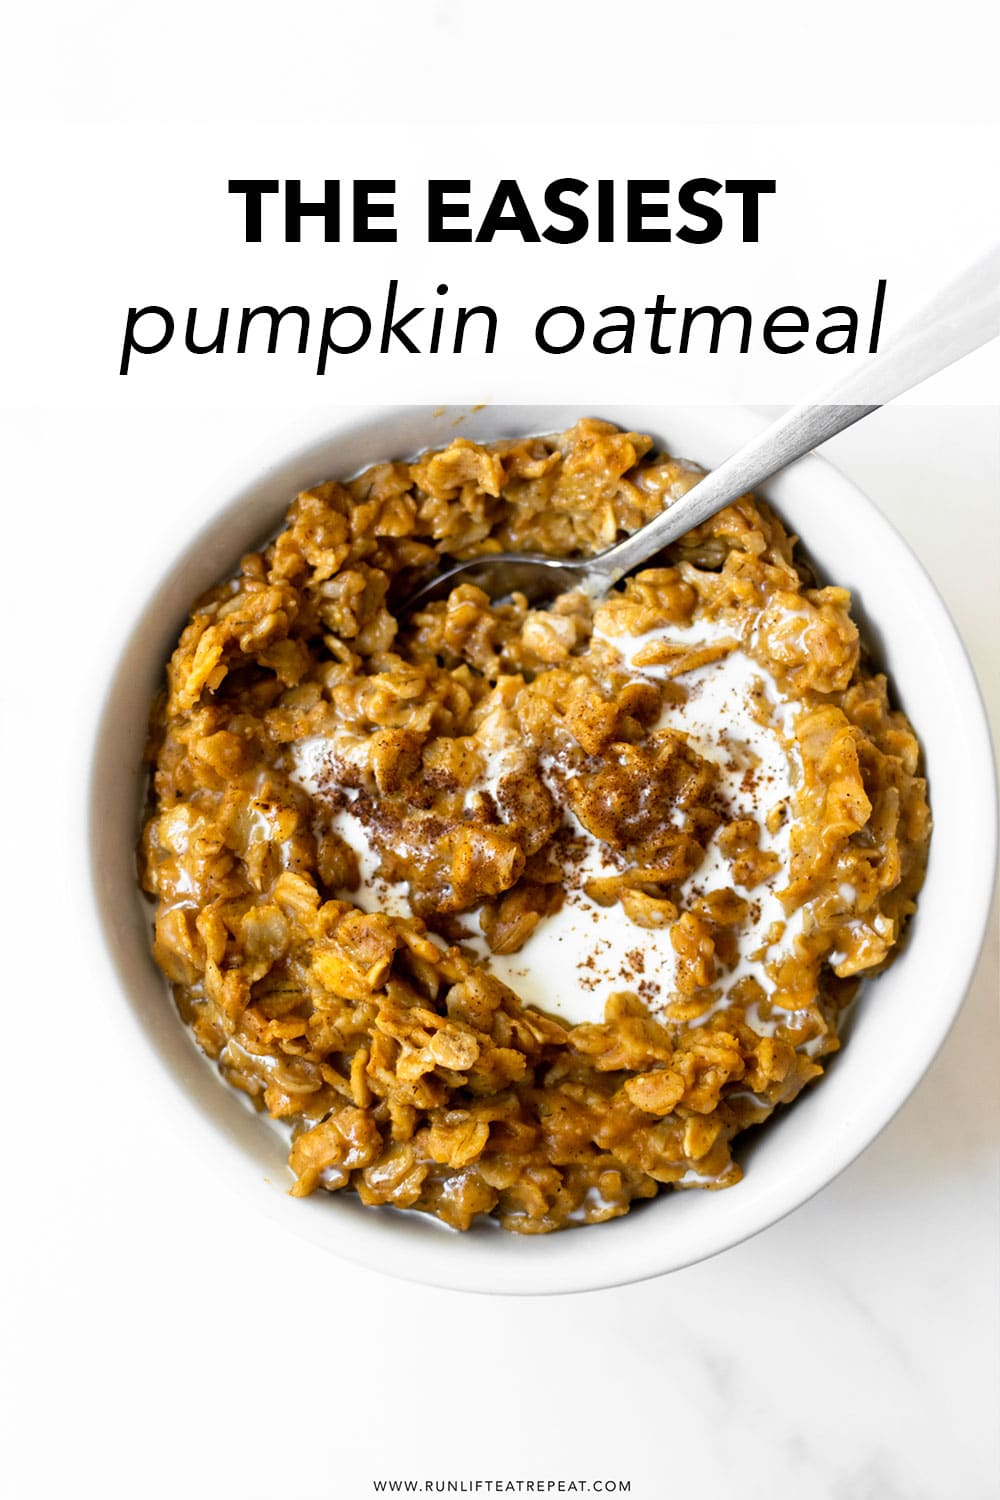 As the cooler weather rolls in this pumpkin oatmeal recipe hits the spot. It has ton of pumpkin flavor, a touch of spice and sweetness— it'll warm you right up!